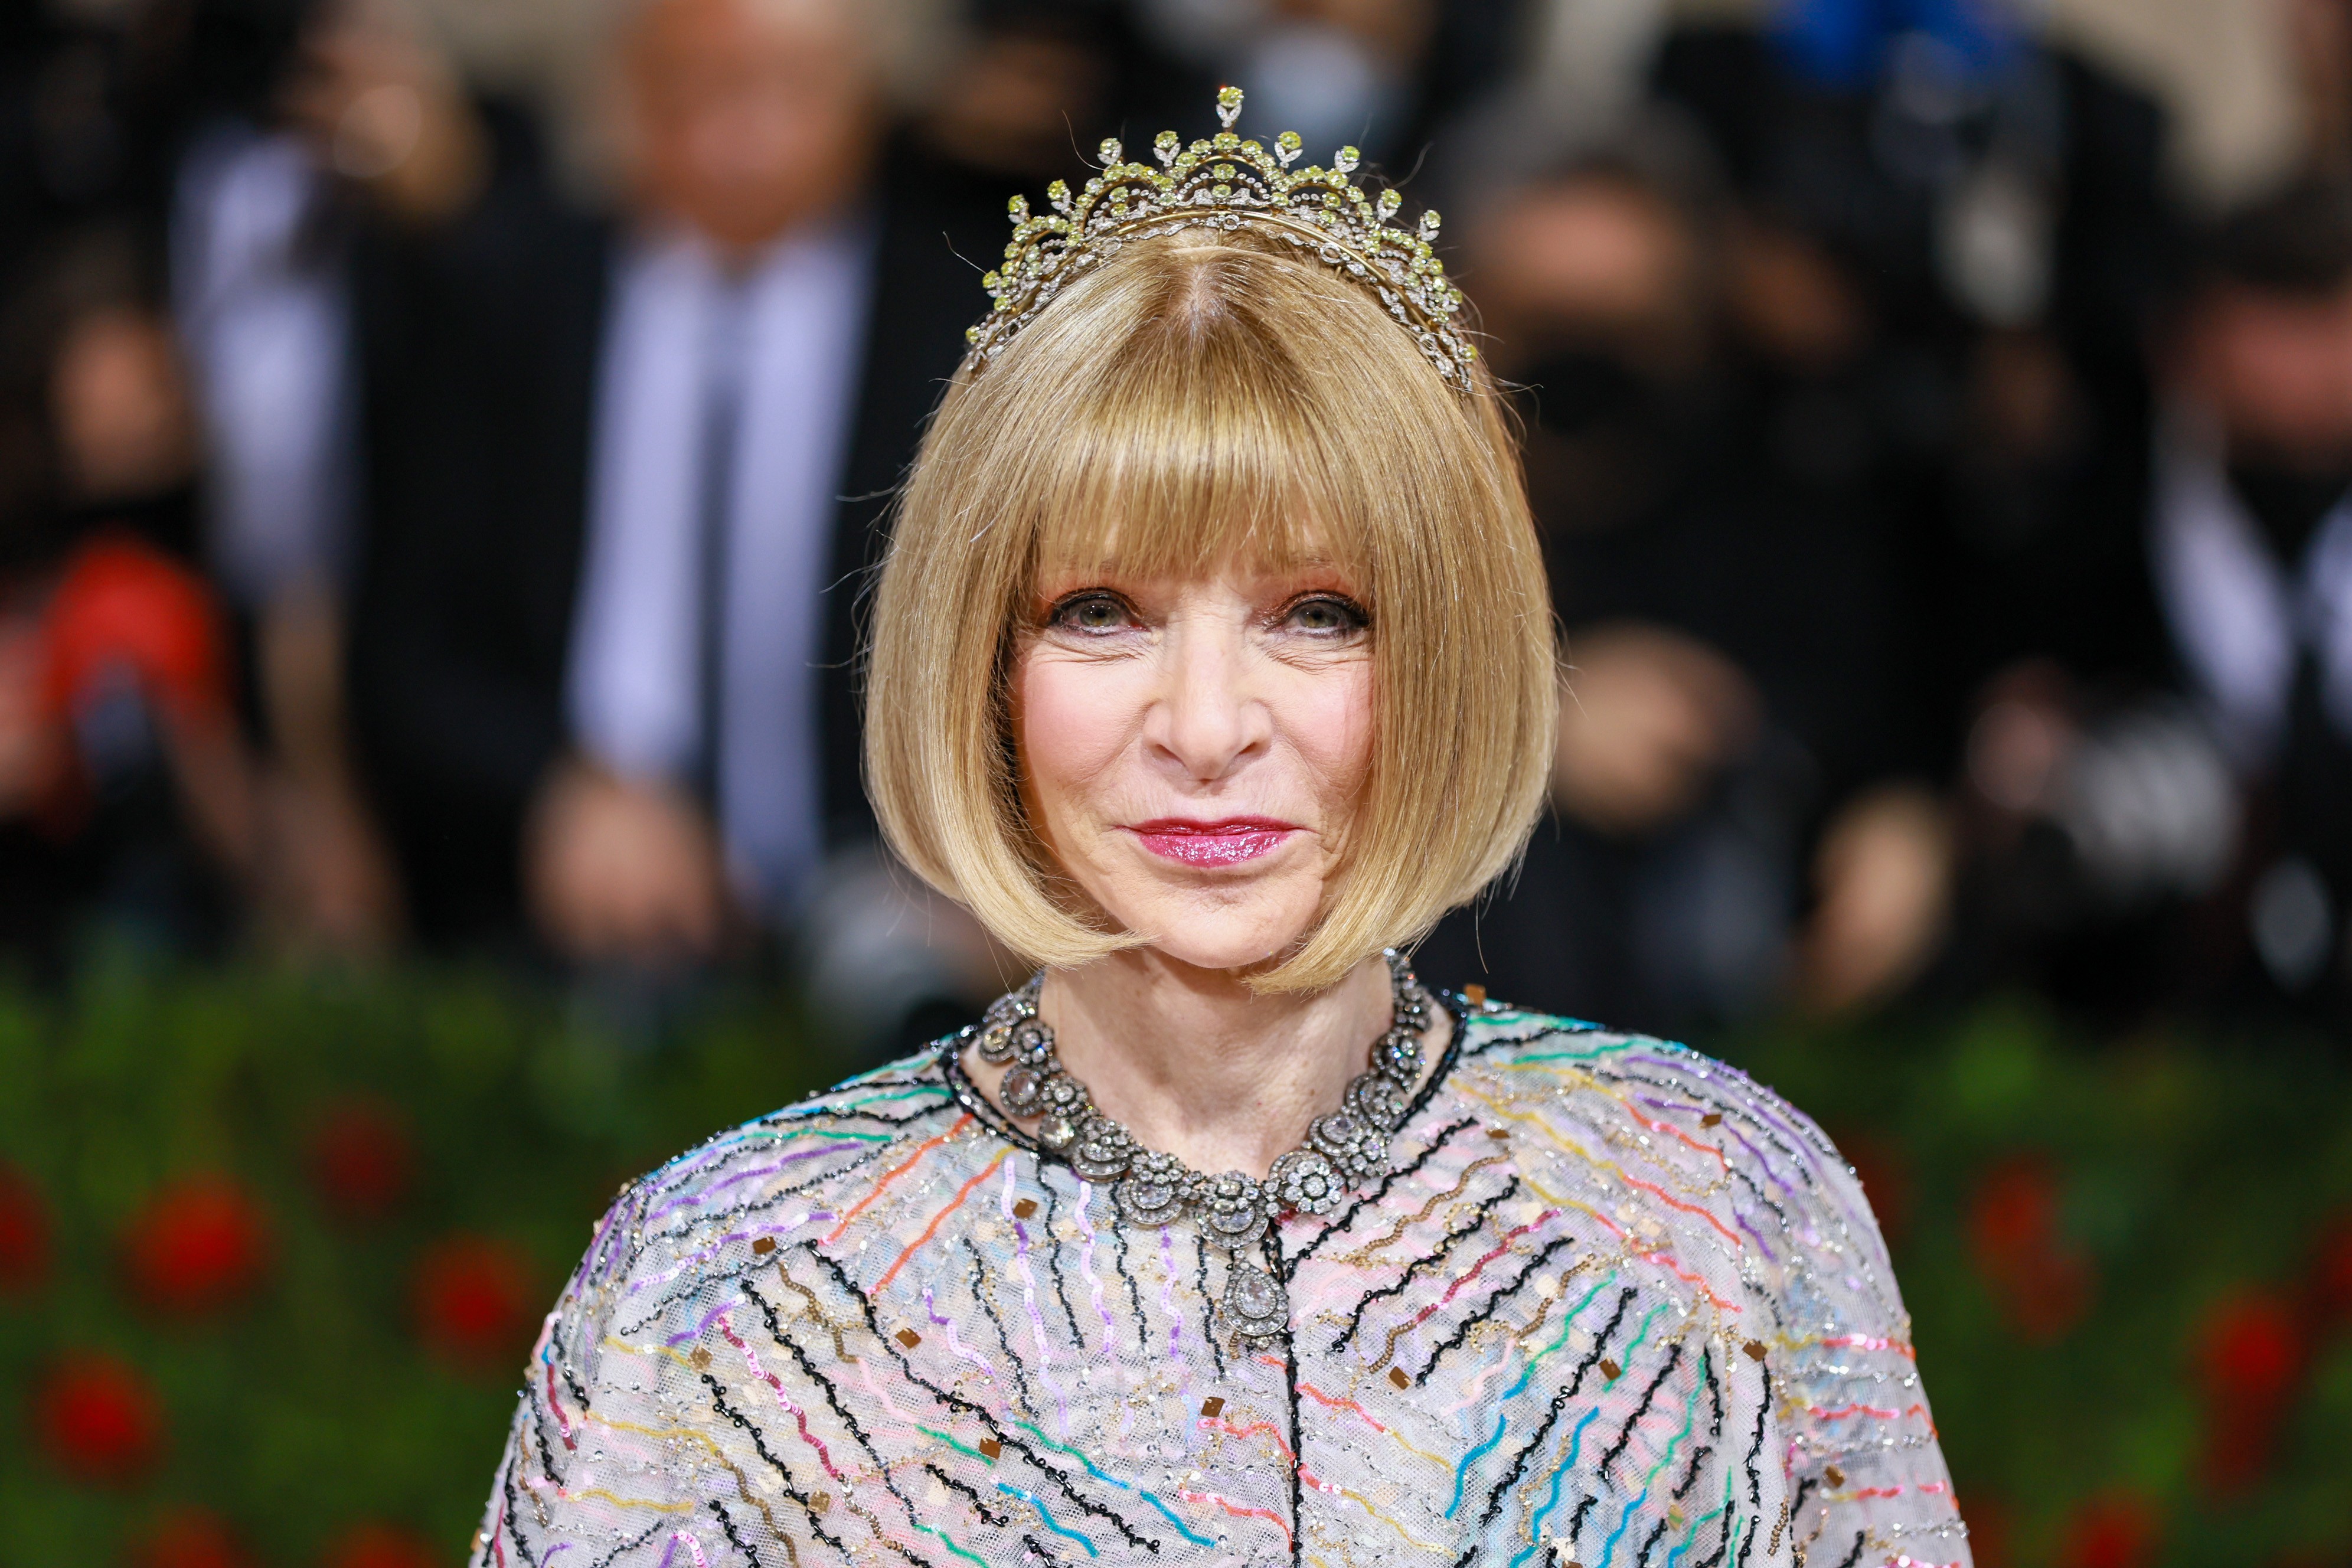 NEW YORK, NEW YORK - MAY 02: Anna Wintour attends The 2022 Met Gala Celebrating "In America: An Anthology of Fashion" at The Metropolitan Museum of Art on May 02, 2022 in New York City. (Photo by Theo Wargo/WireImage) (Foto: WireImage)